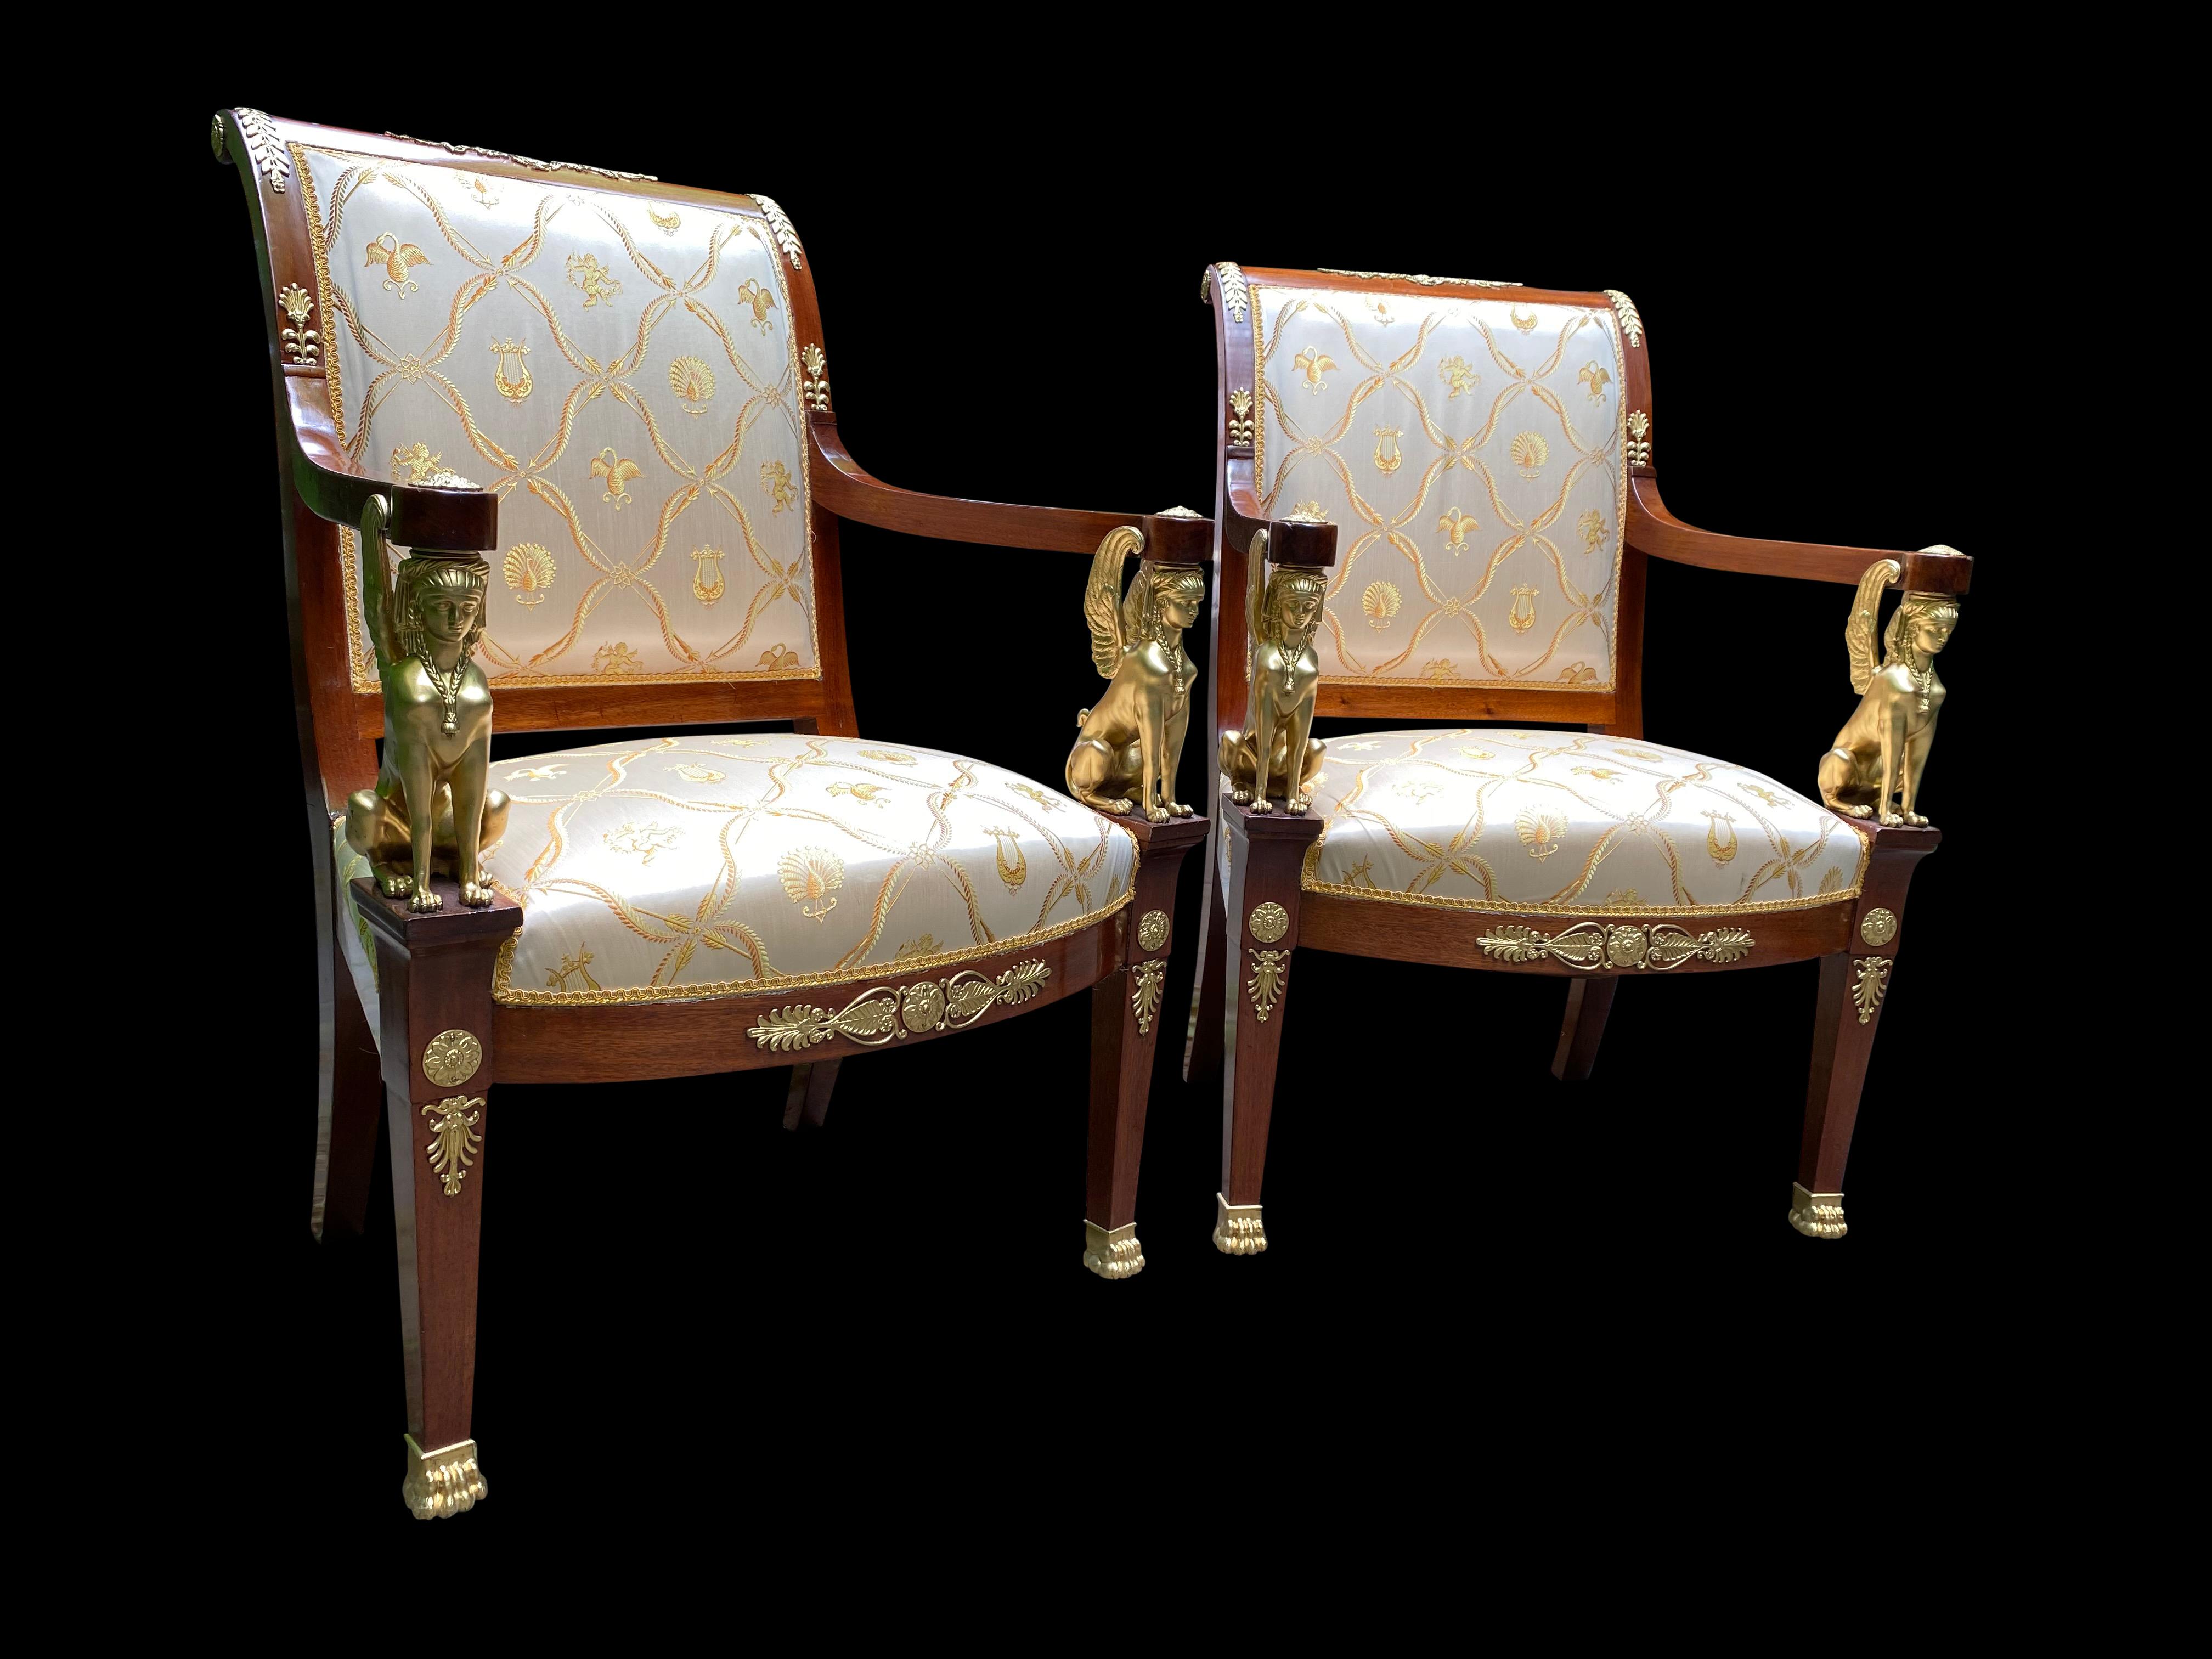 Napoleon III French Empire Armchairs with Bronze Mounts, 19th Century For Sale